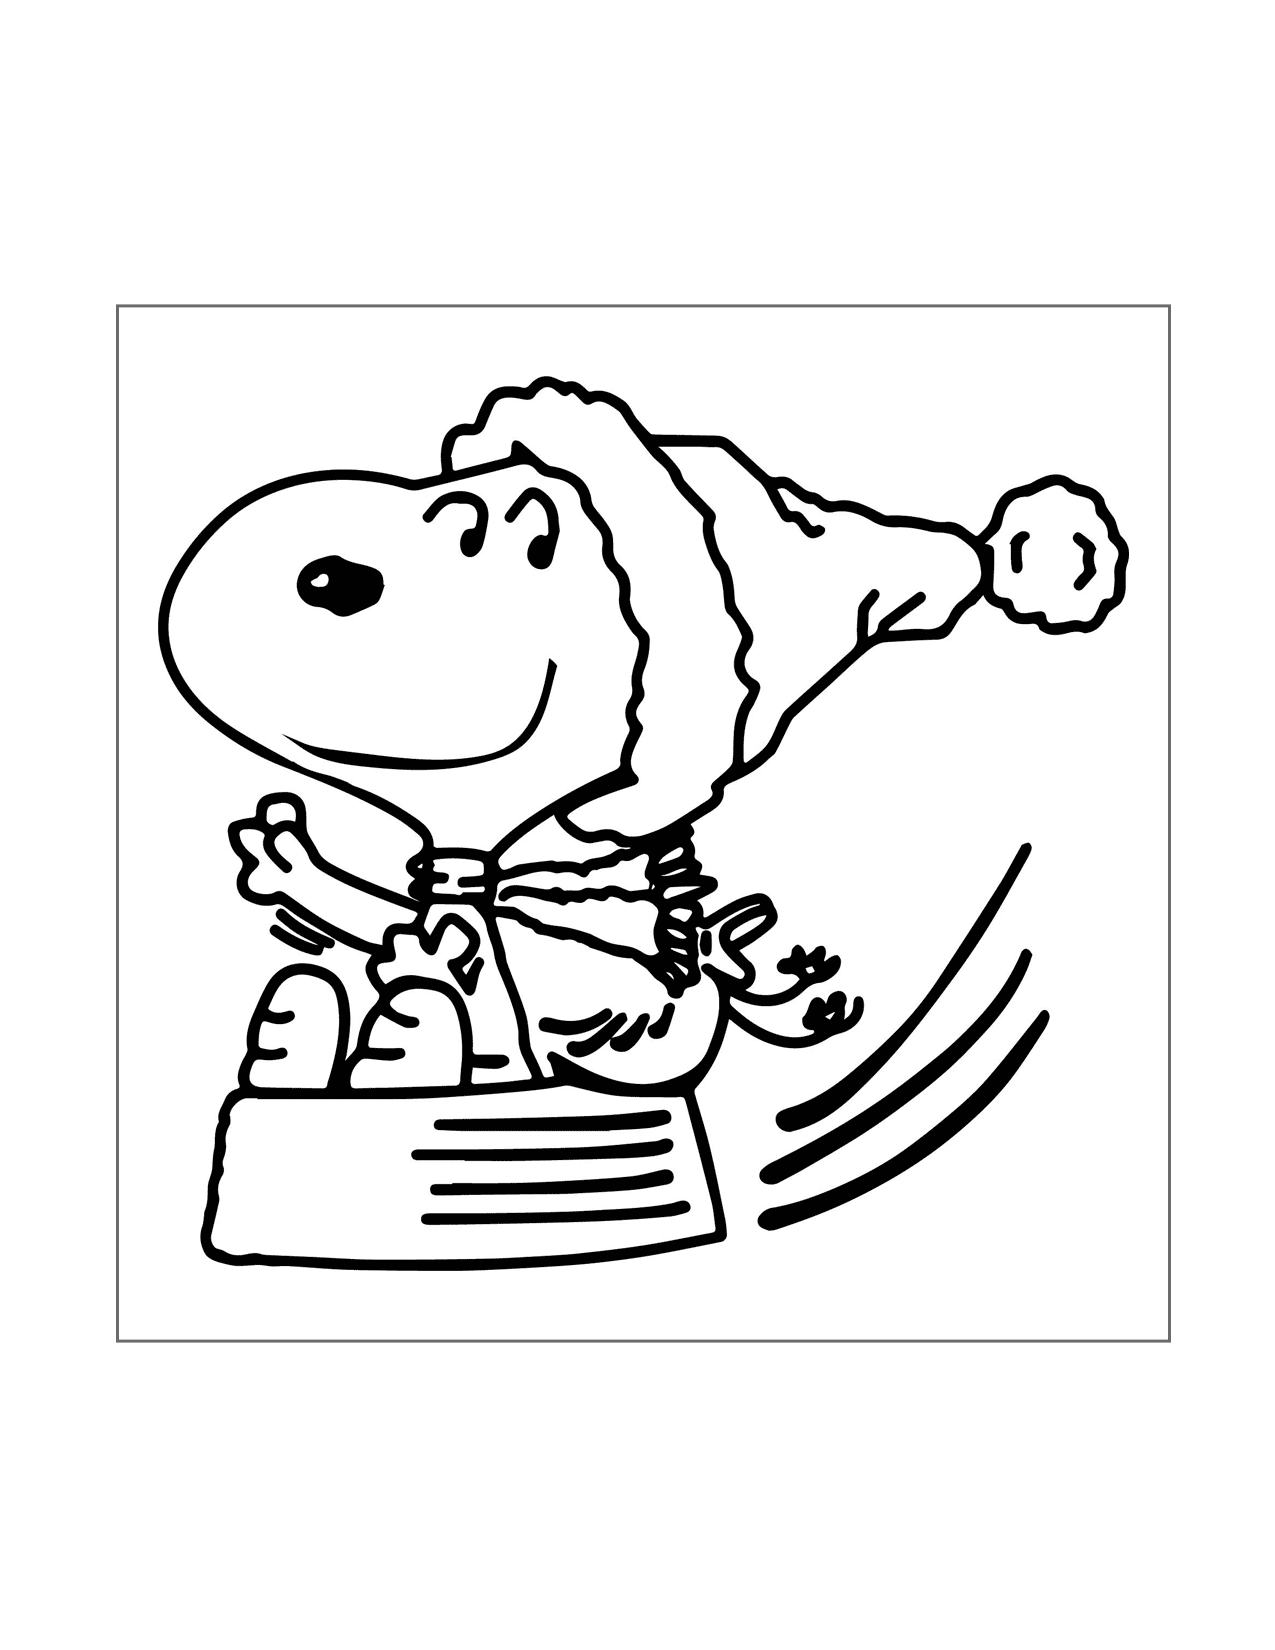 Snoopy Sledding In Food Dish Coloring Page